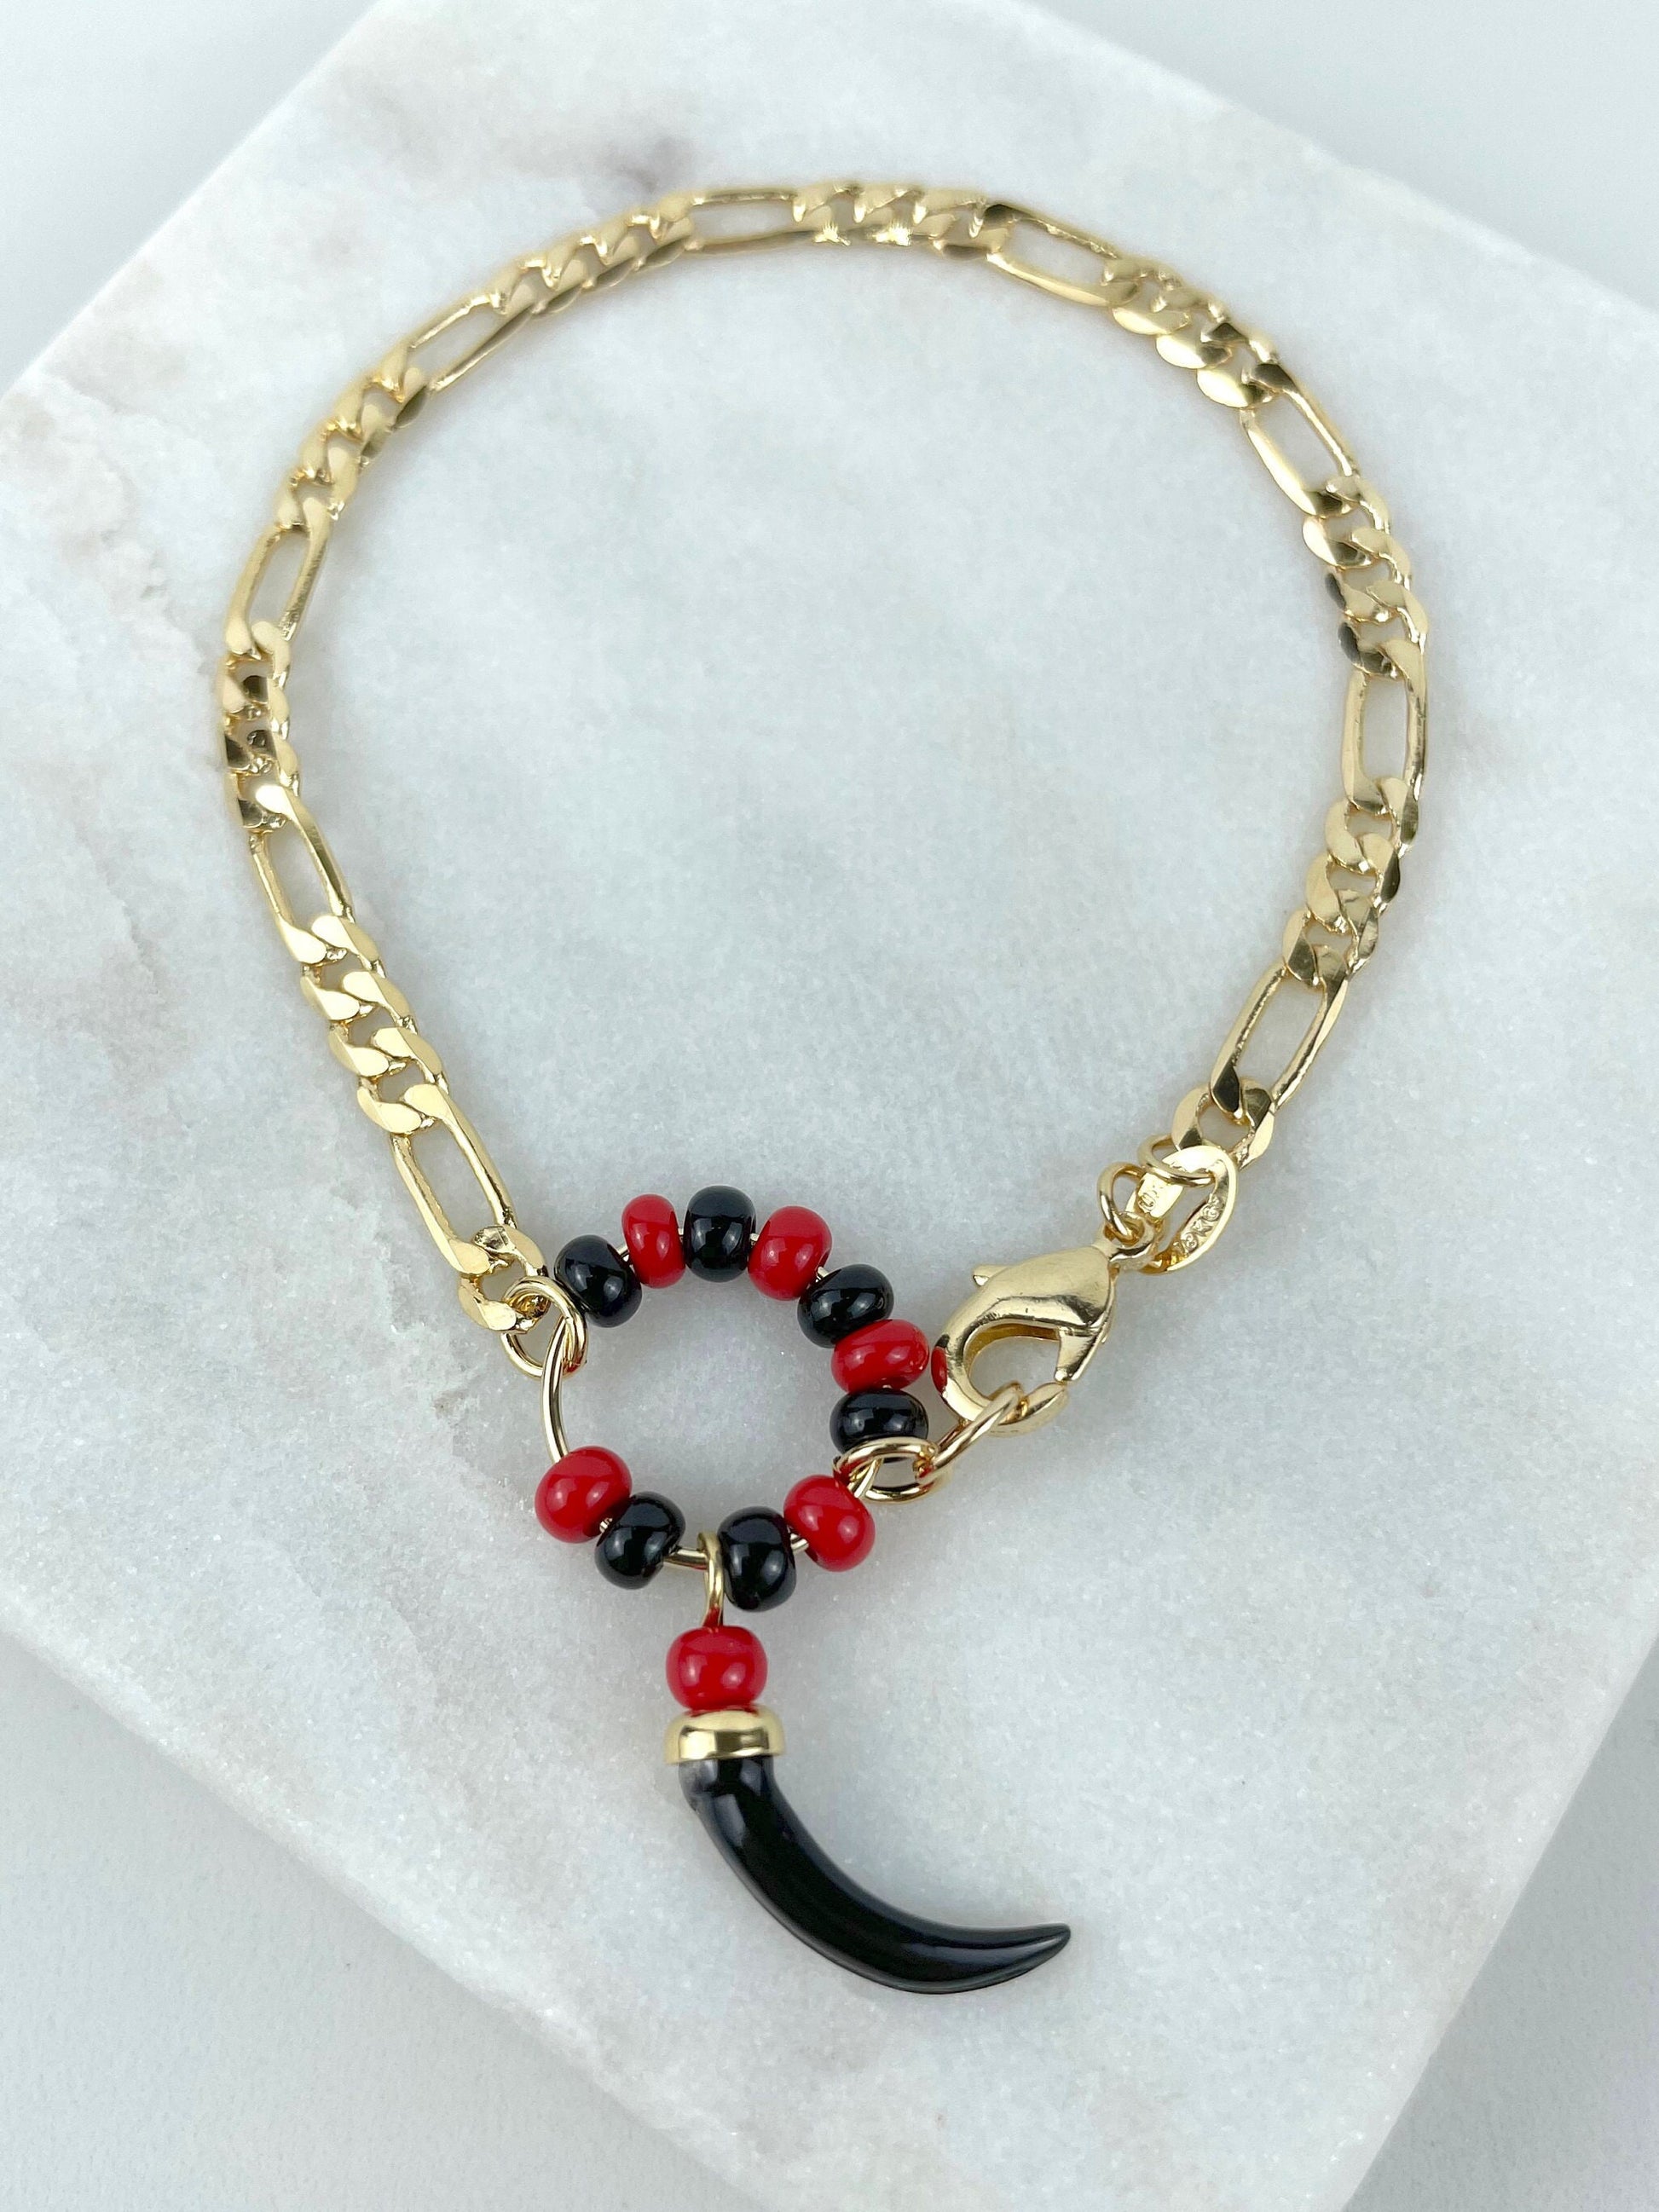 18k Gold Filled 4mm Mariner Link, Red & Black Beads in Circle, Azabache Style, Black Chili Charms Bracelet, Wholesale Jewelry Supplies